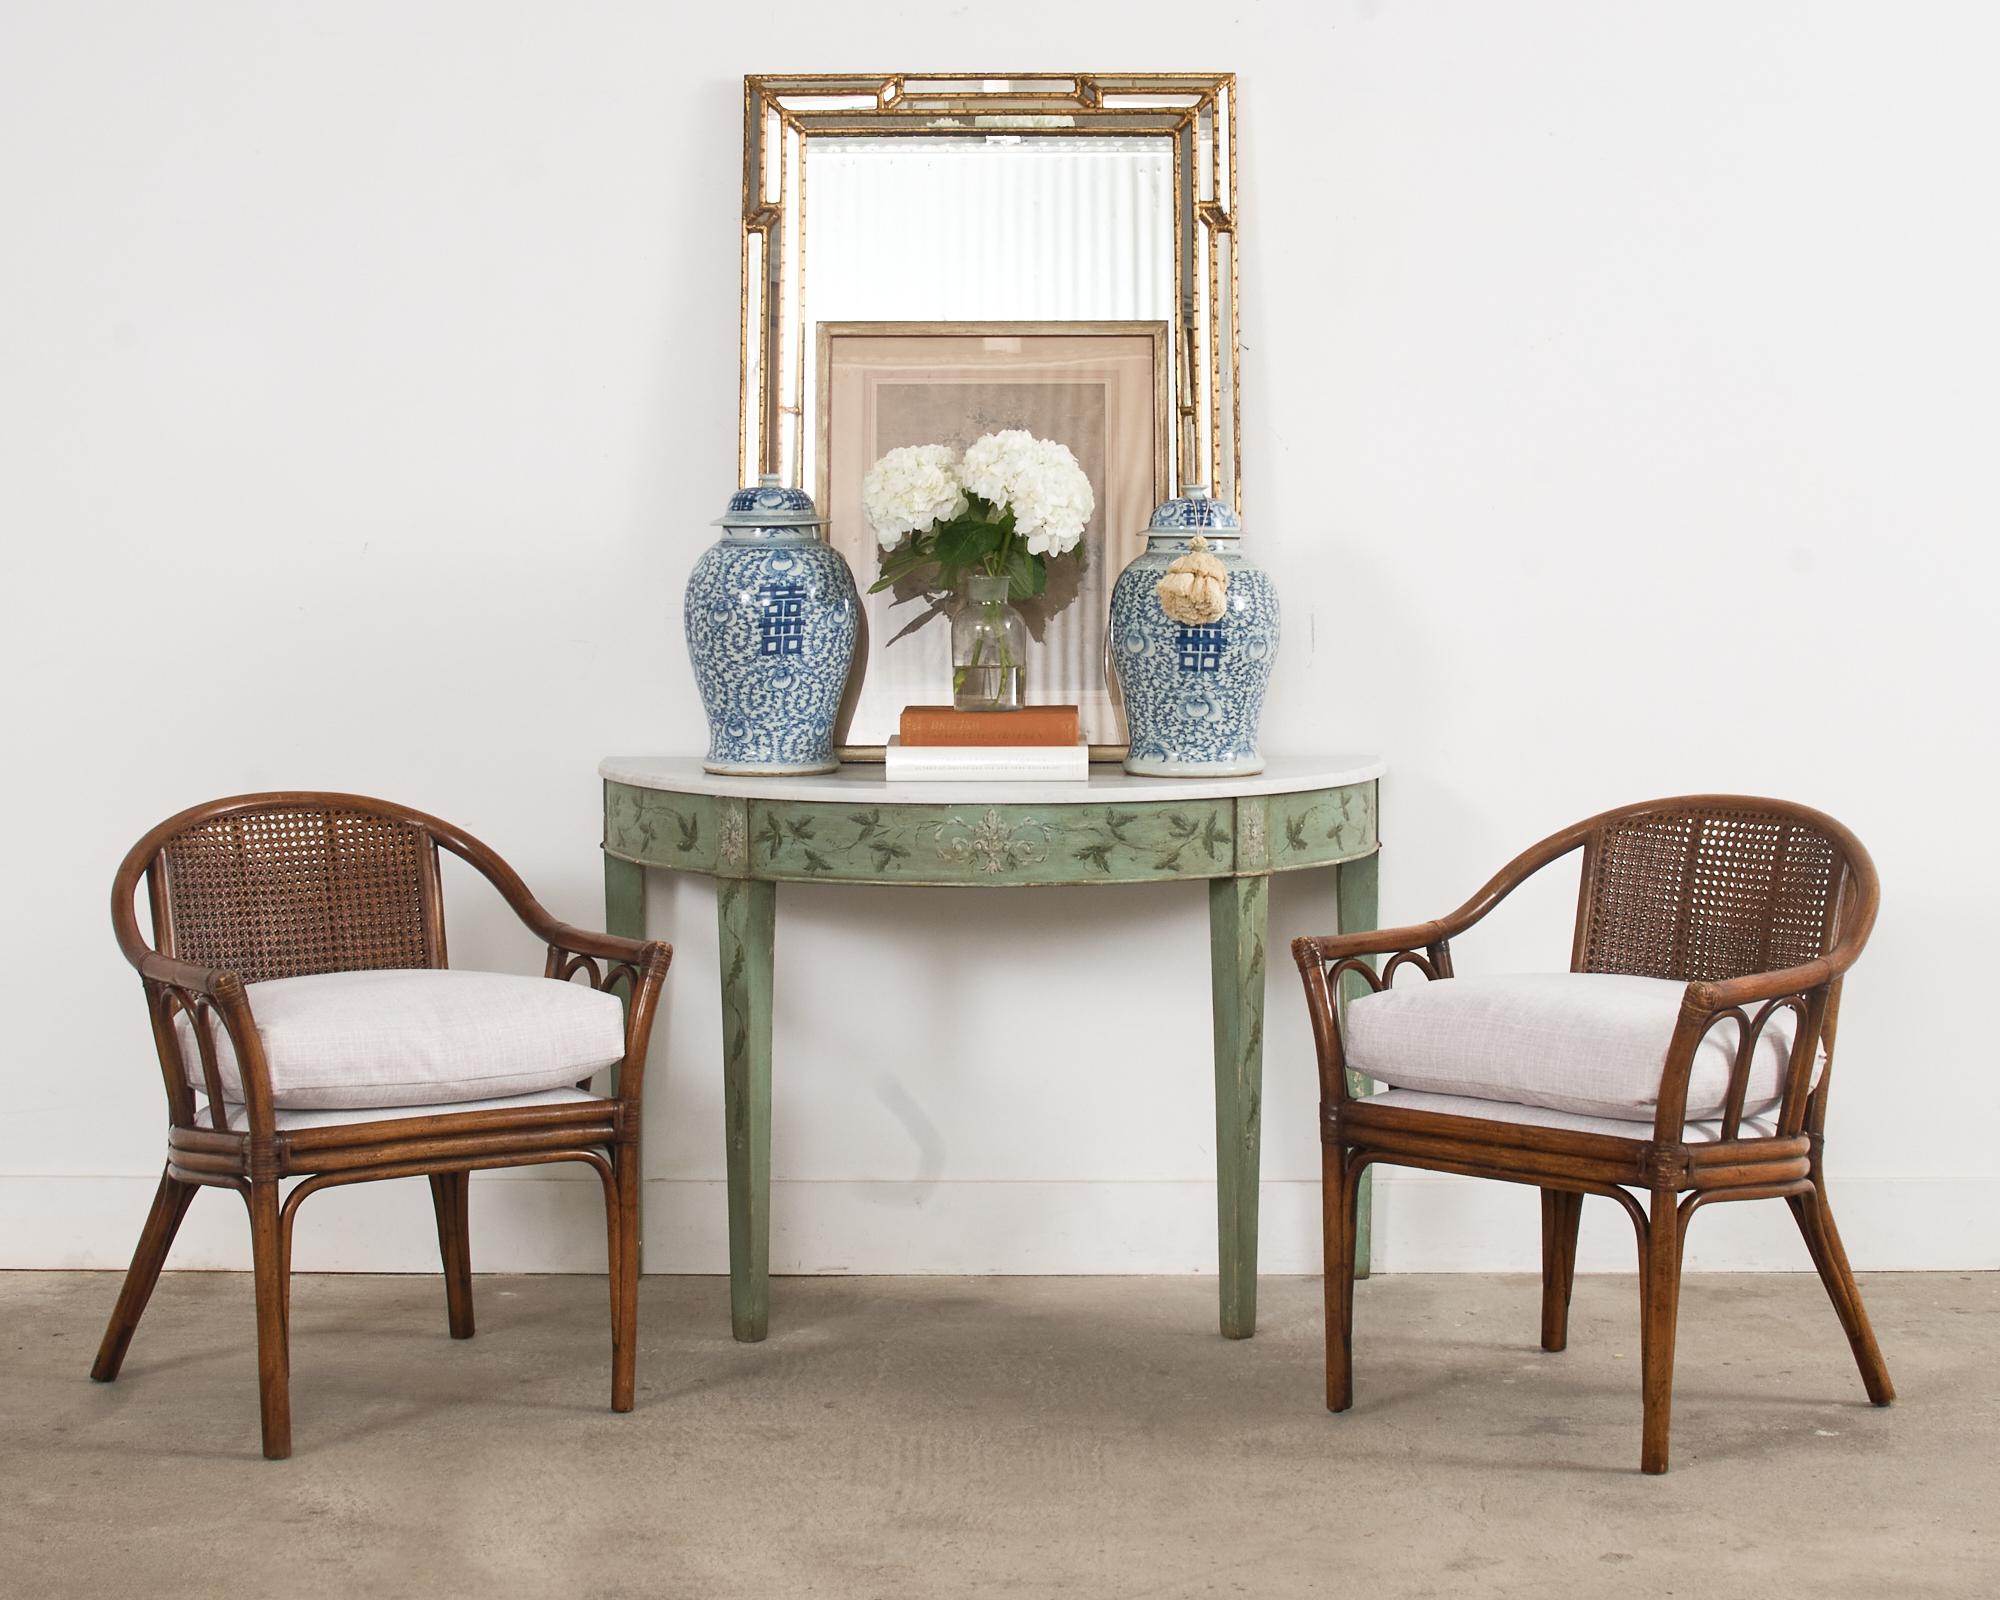 Opulent 20th century Italian Labarge cushion wall or mantle mirror in a rectangular shape. The mirror features a giltwood faux bamboo decorated frame with intricate mirror glass facets to catch the light at different angles. The giltwood has an